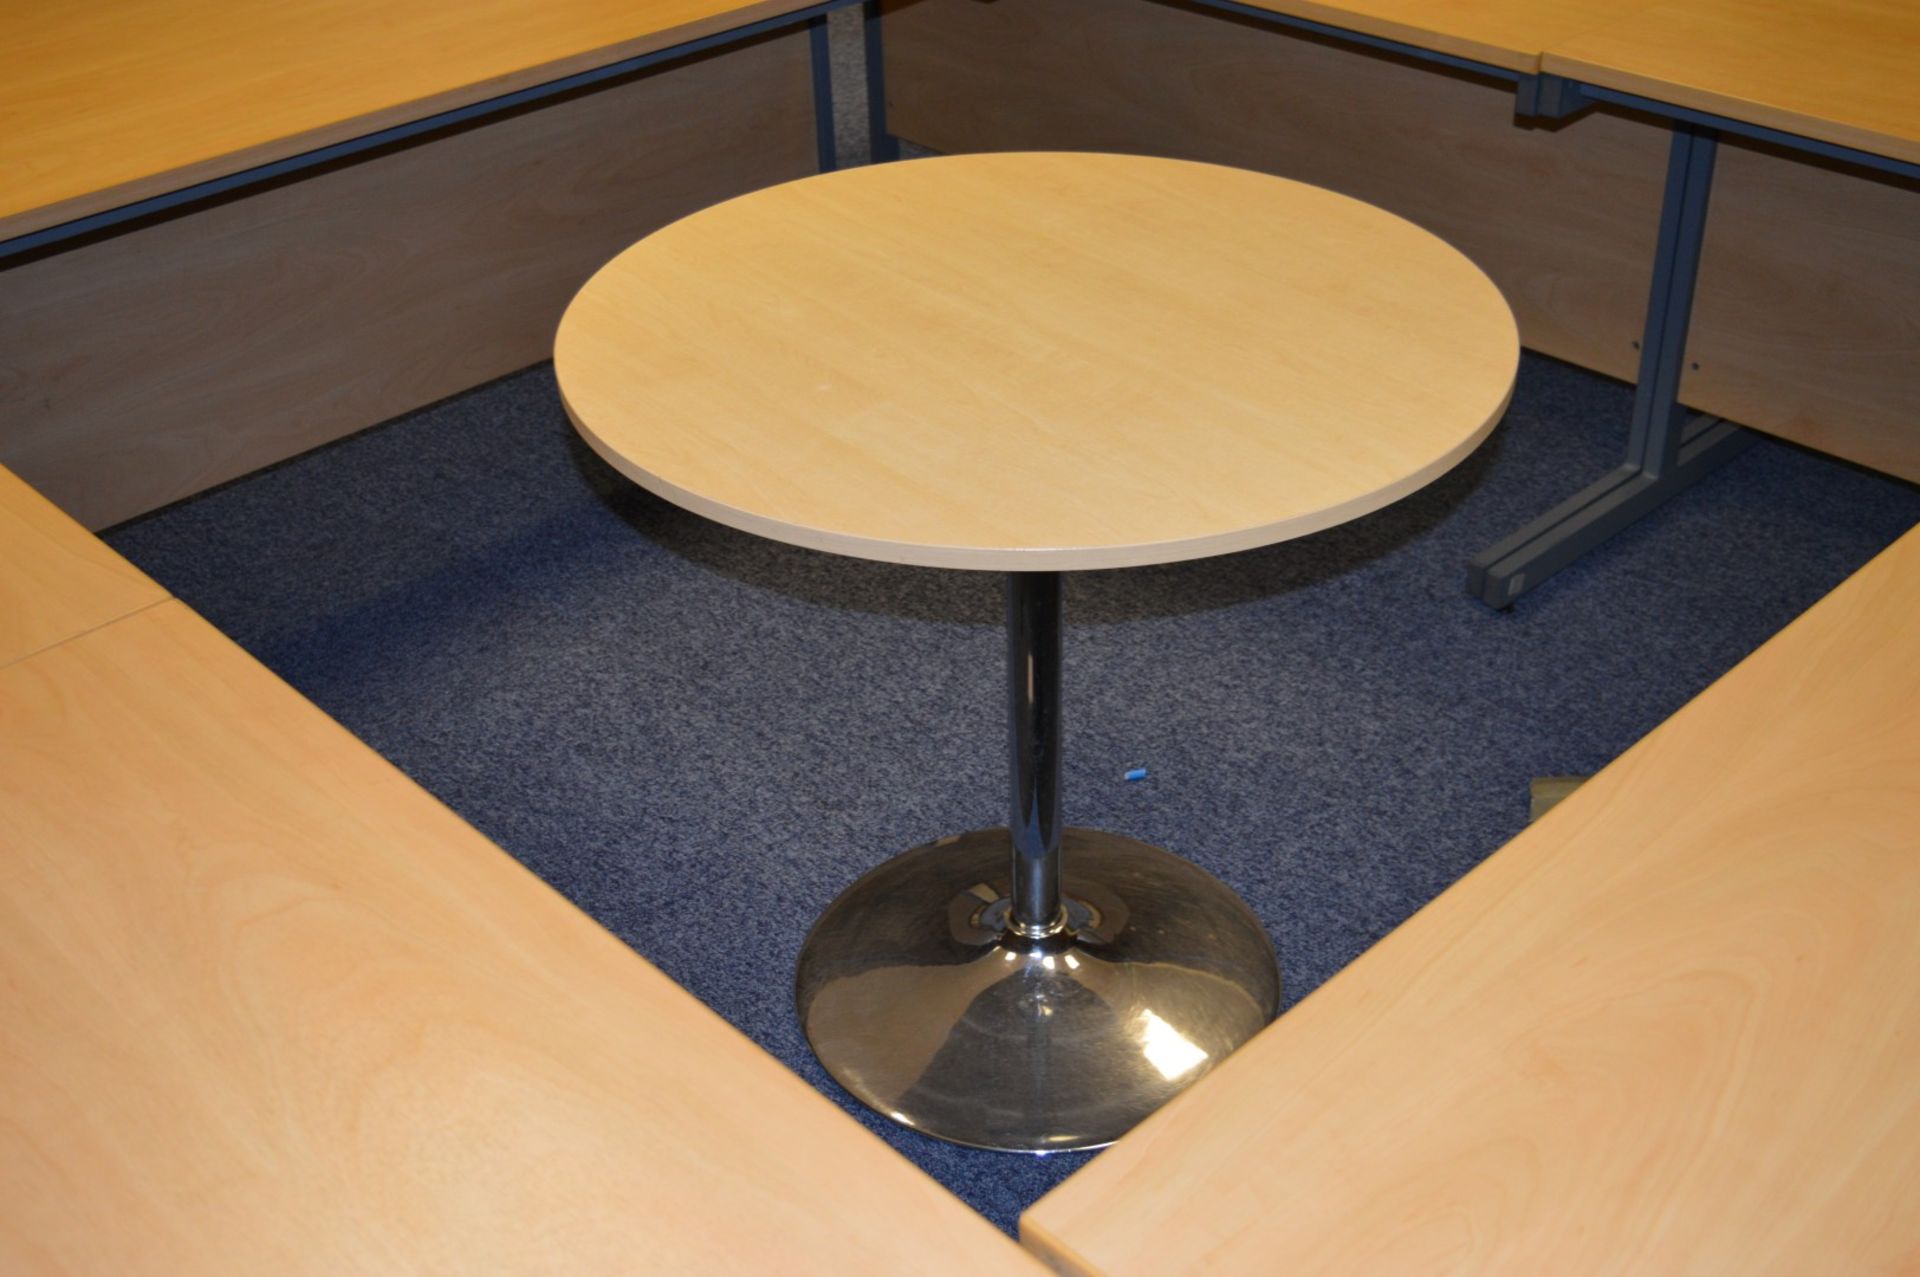 6 x Large Office Desks Plus Small Circular Meeting Table - H73 x W160 x D80 cms - Premium Quality - Image 4 of 5